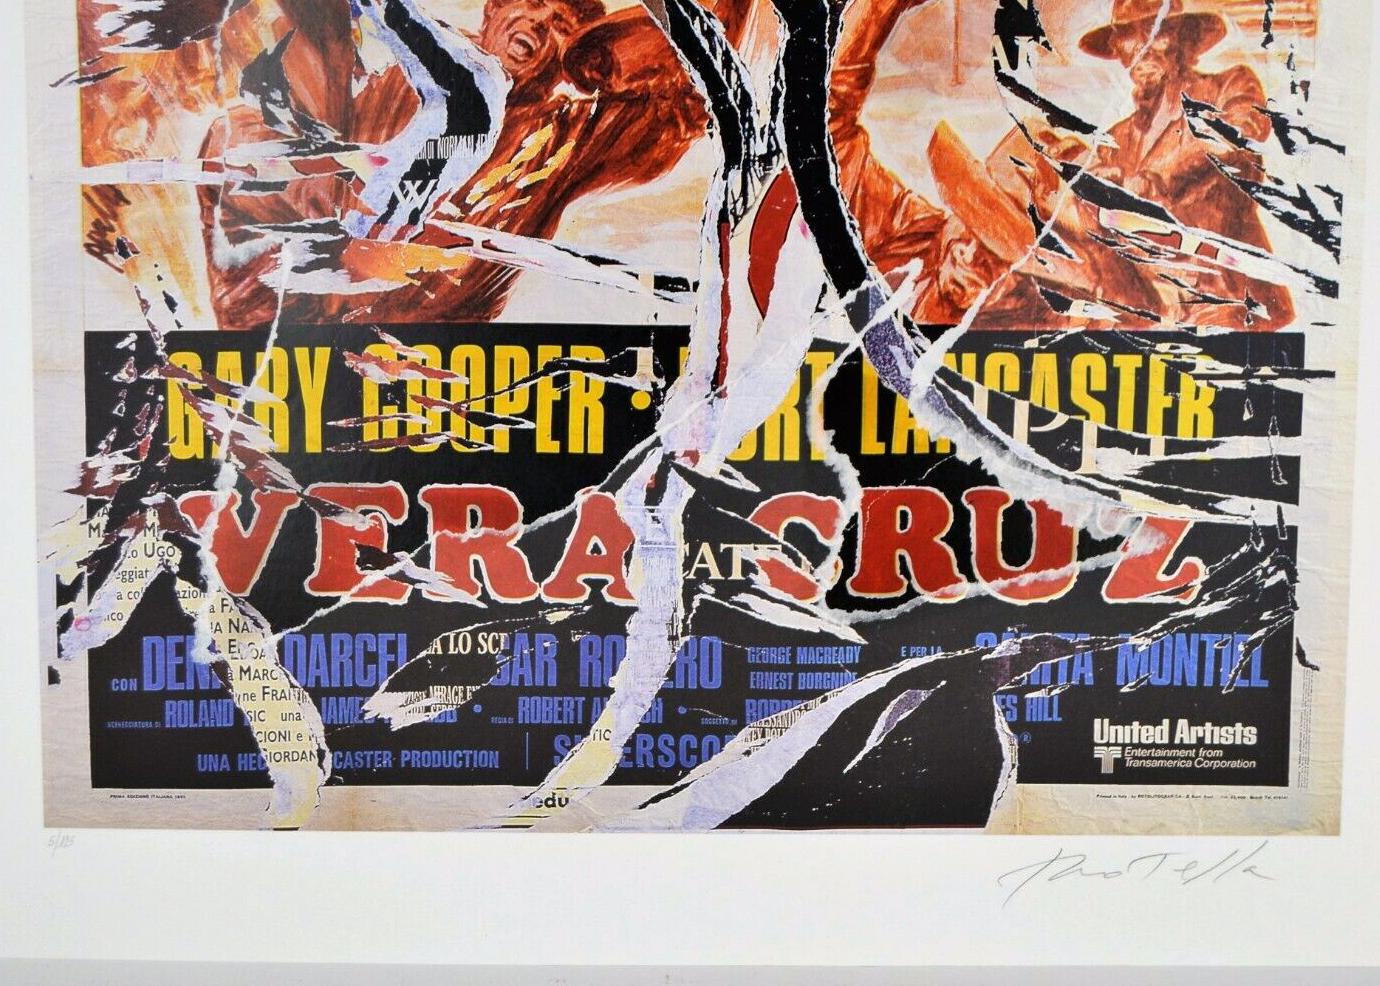 Mimmo Rotella - VERA CRUZ
Date of creation: circa 2005
Medium: Multiple decollage screen print on heavyweight paper
Edition: 125 + L + P.A.
Size: 100 x 70 cm
Condition: In very good conditions and never framed
Observations: Multiple decollage hand